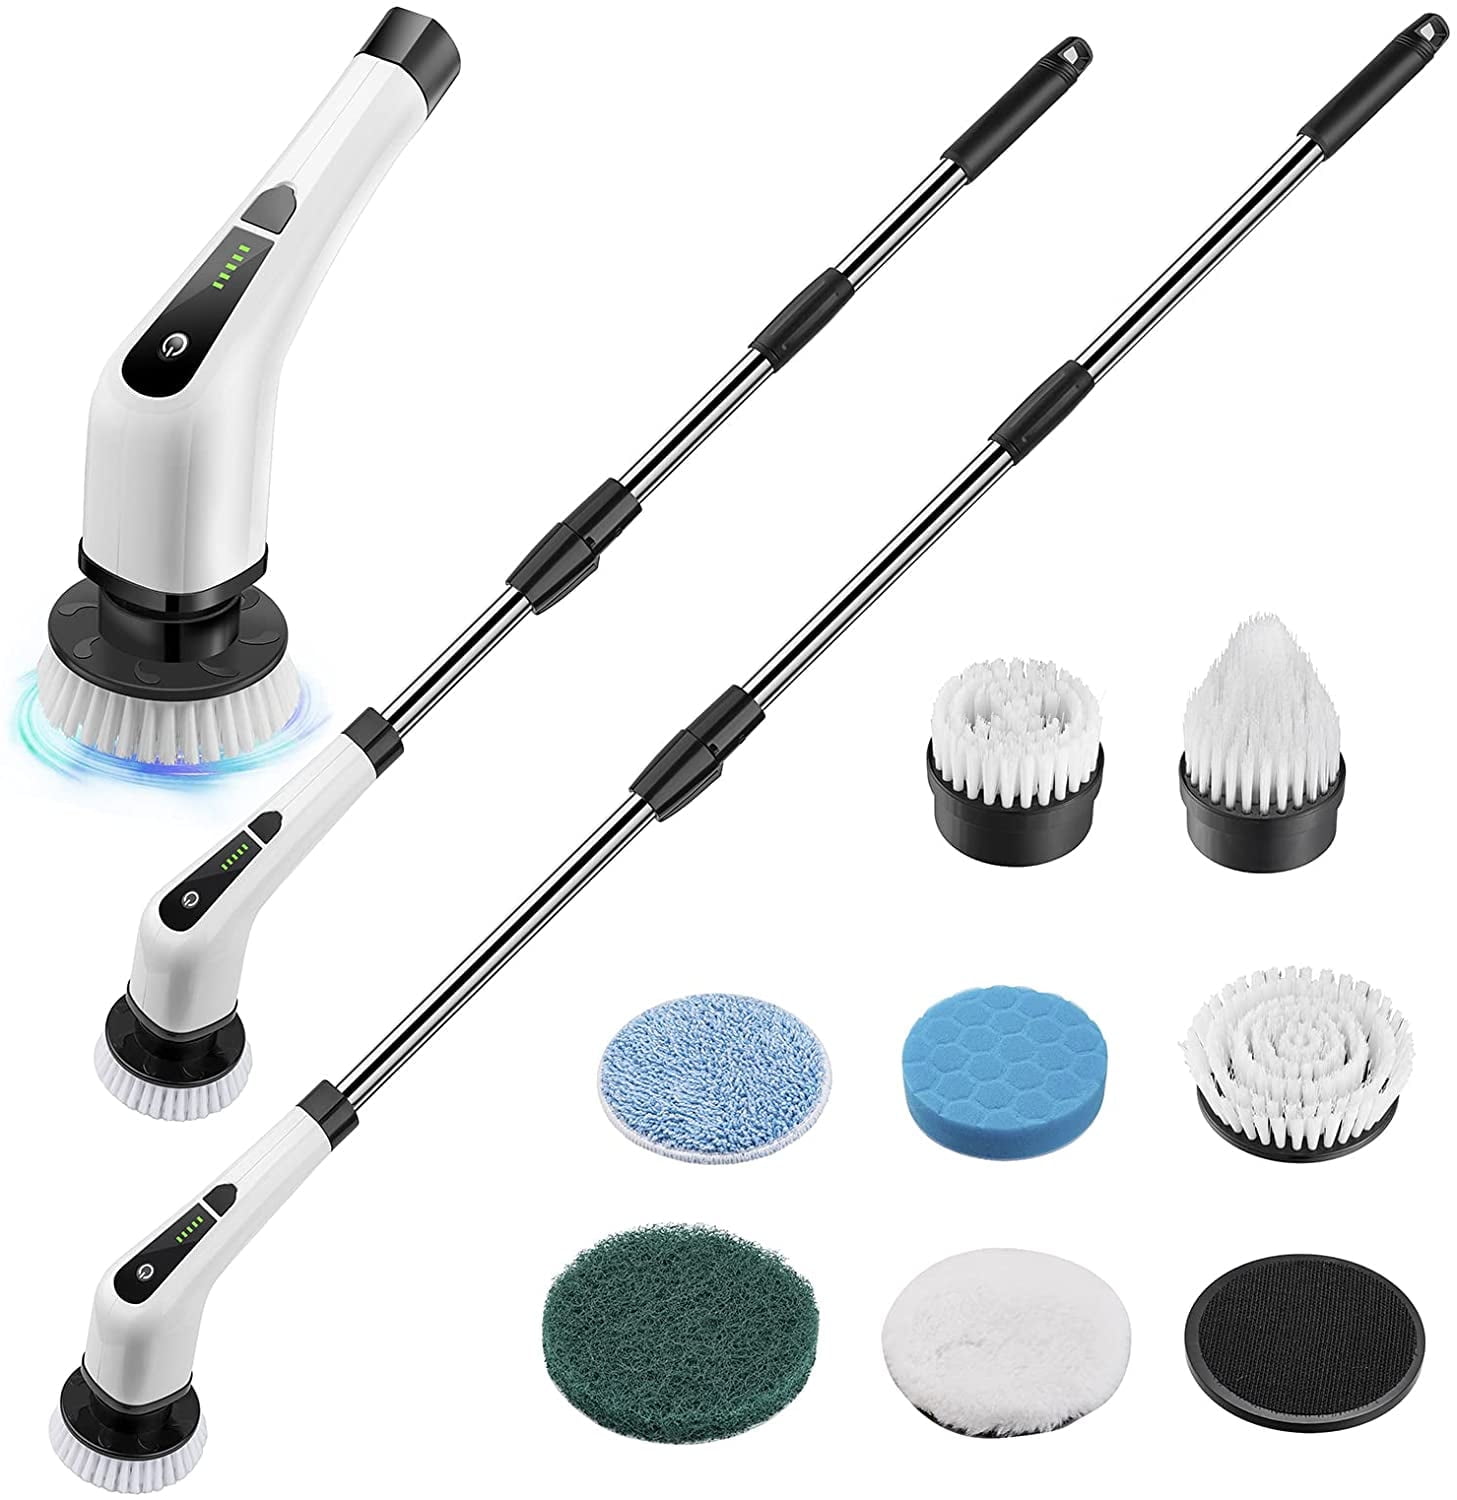 Versatile Electric Dish Brush for a Perfect Home 